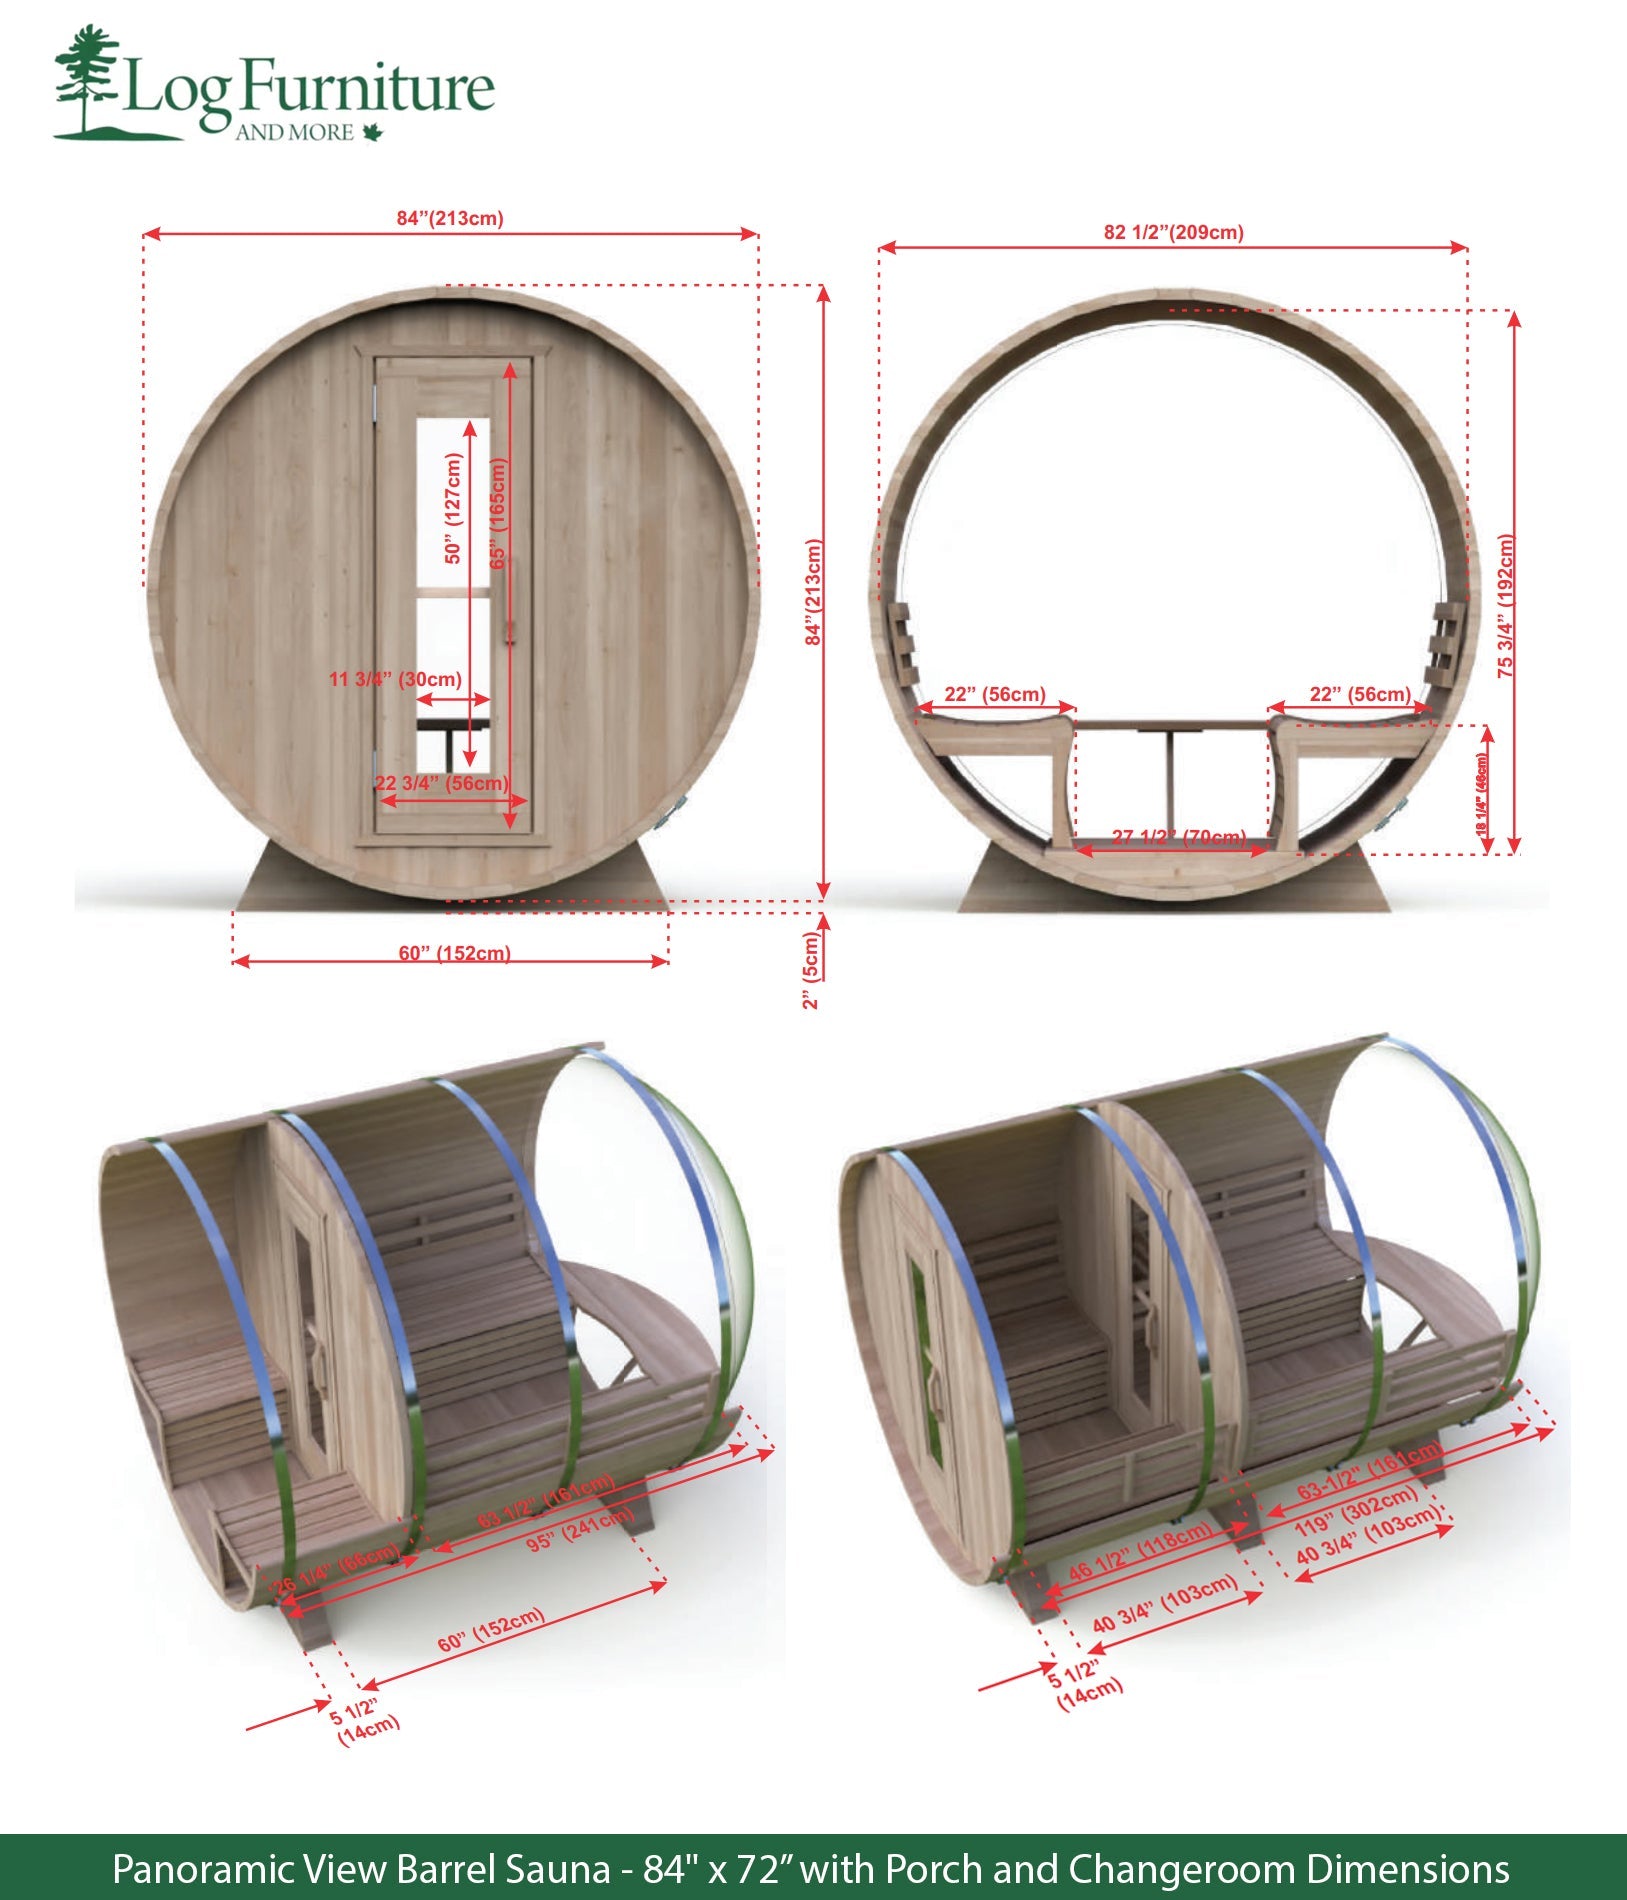 Panoramic View Barrel Sauna - 84" x 72” with Porch and Changeroom Dimensions